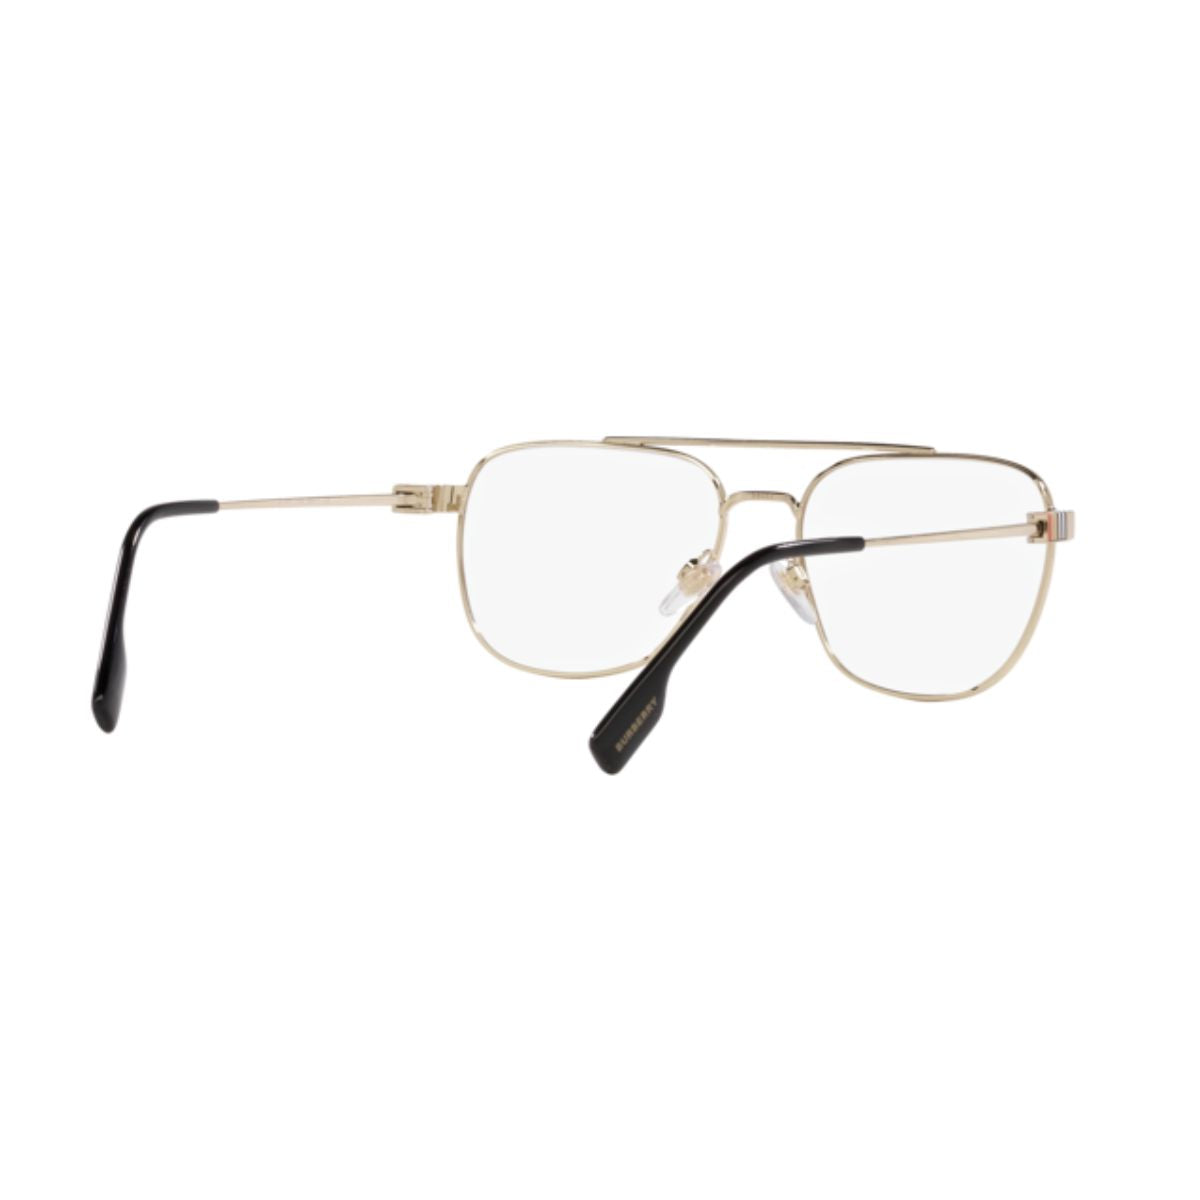 "shop burberry 1377 1109 stylish square frame for men online at optorium"